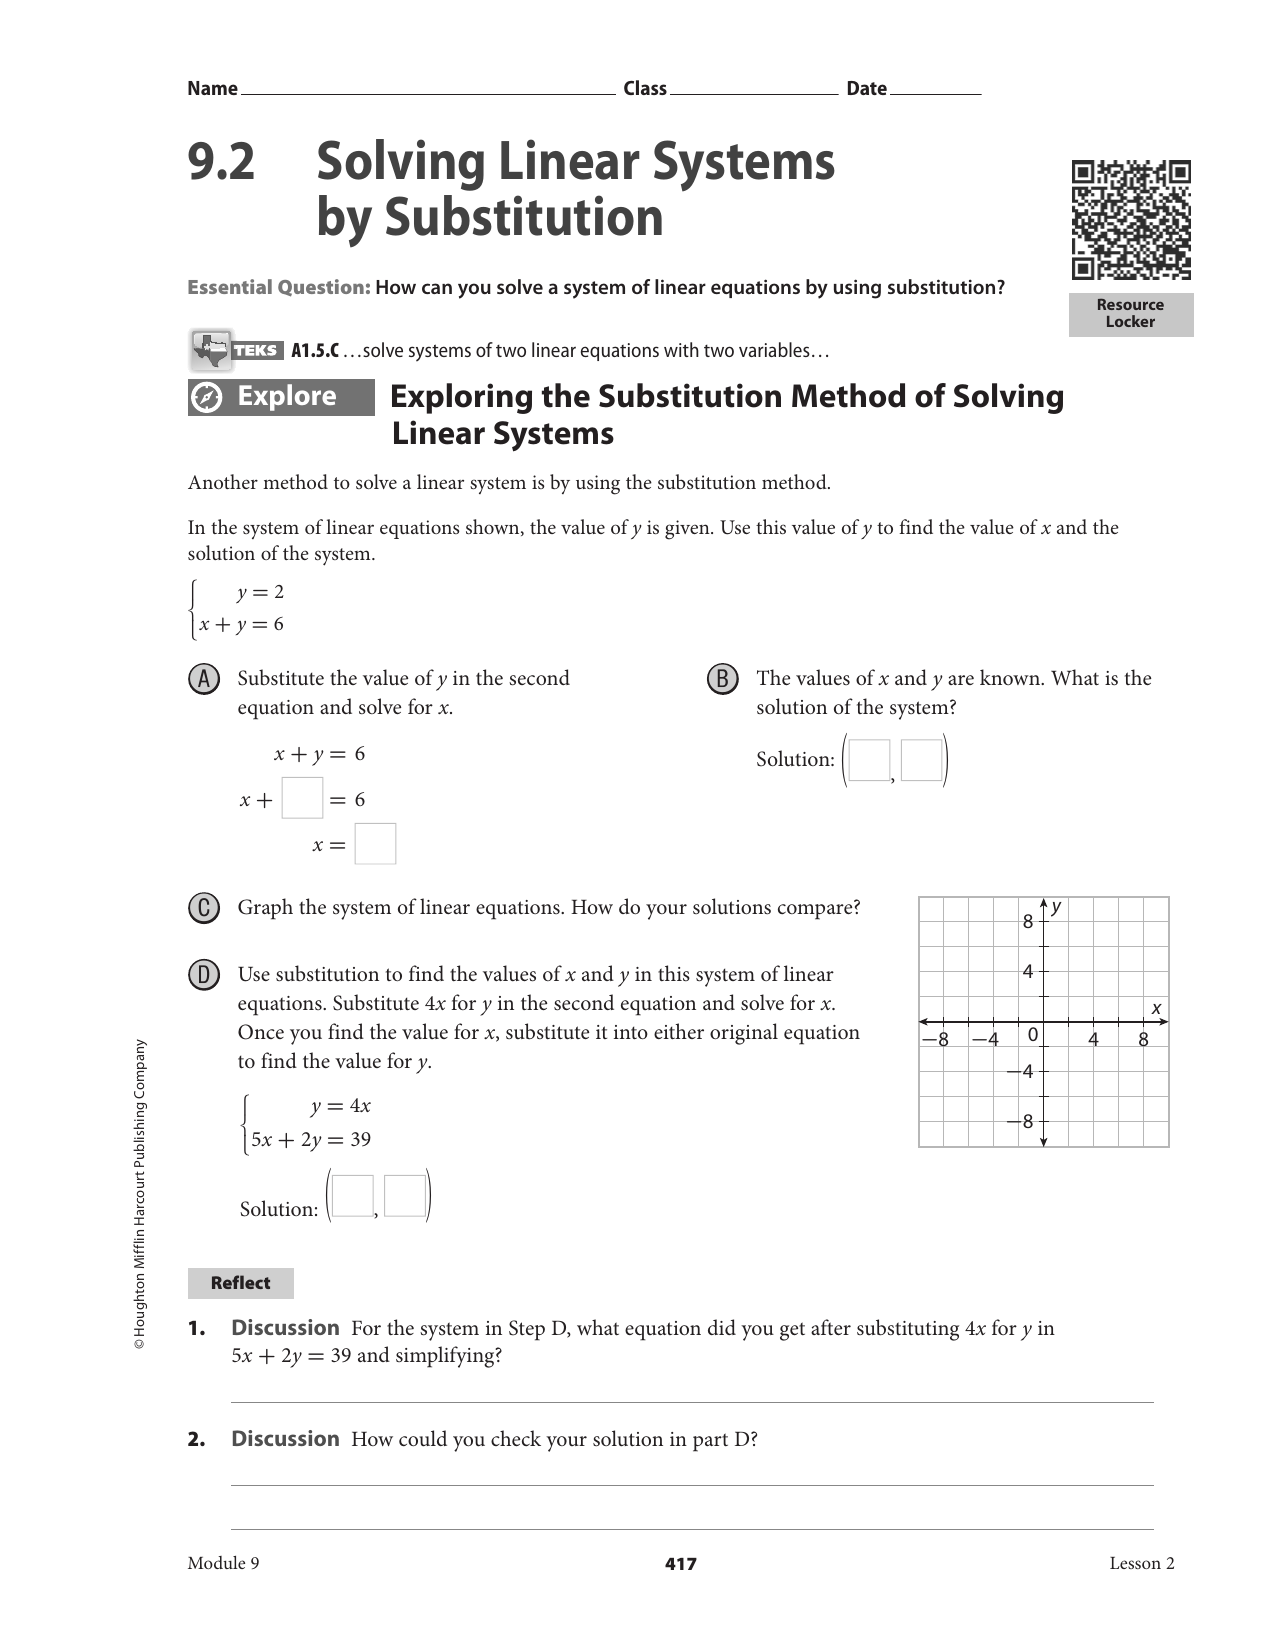 10 . 10 Solving Linear Systems by Substitution With Substitution Method Worksheet Answers